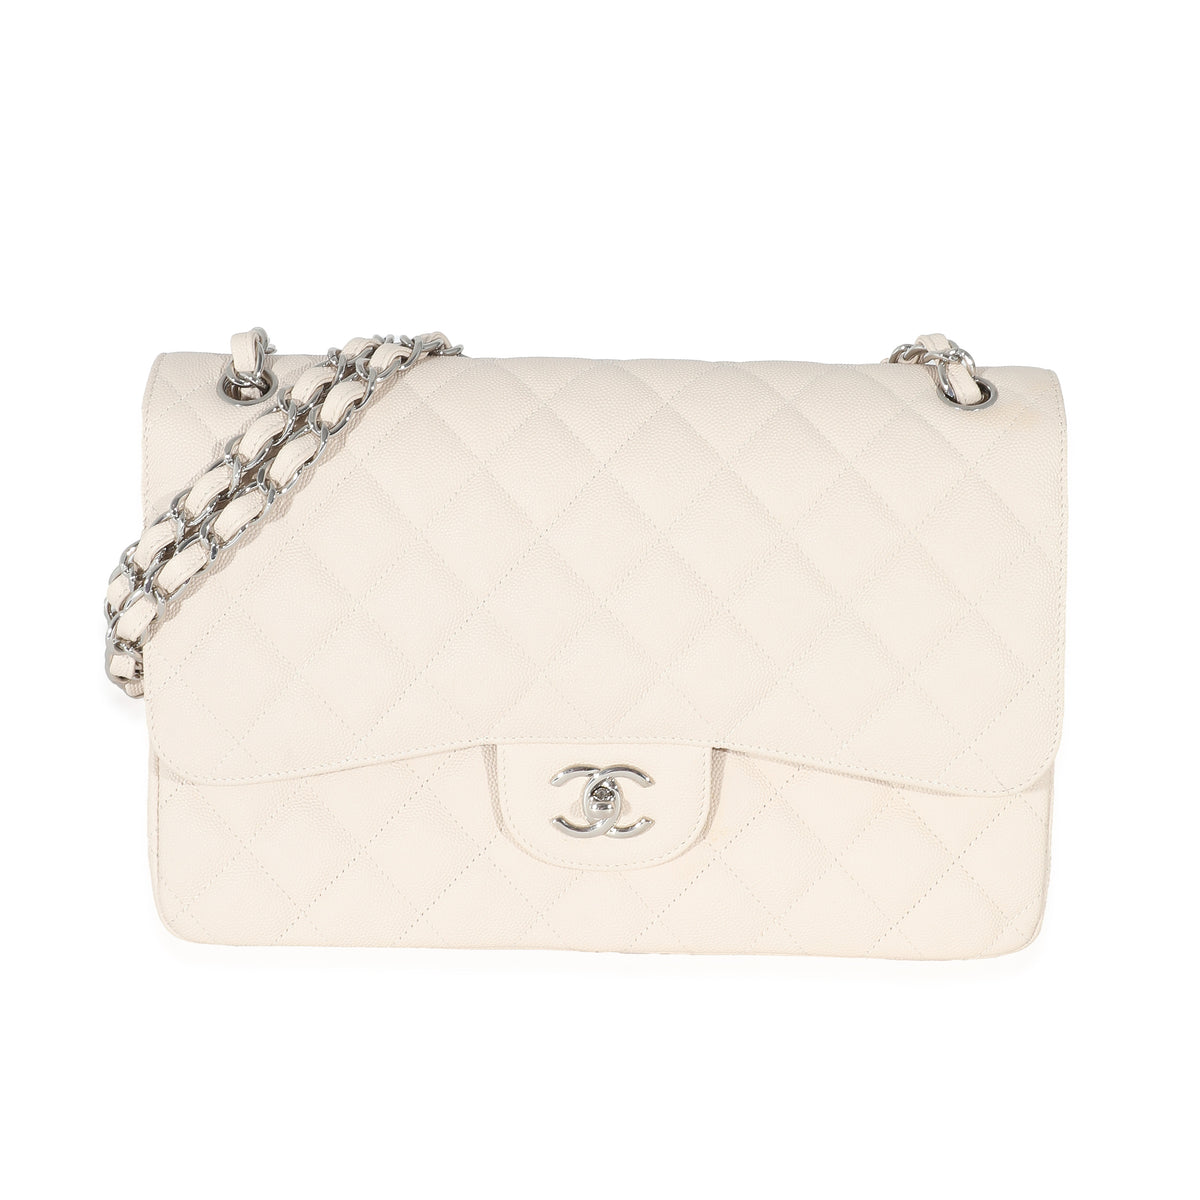 CHANEL Jumbo Classic Double Flap Bag in Beige Clair Caviar GHW